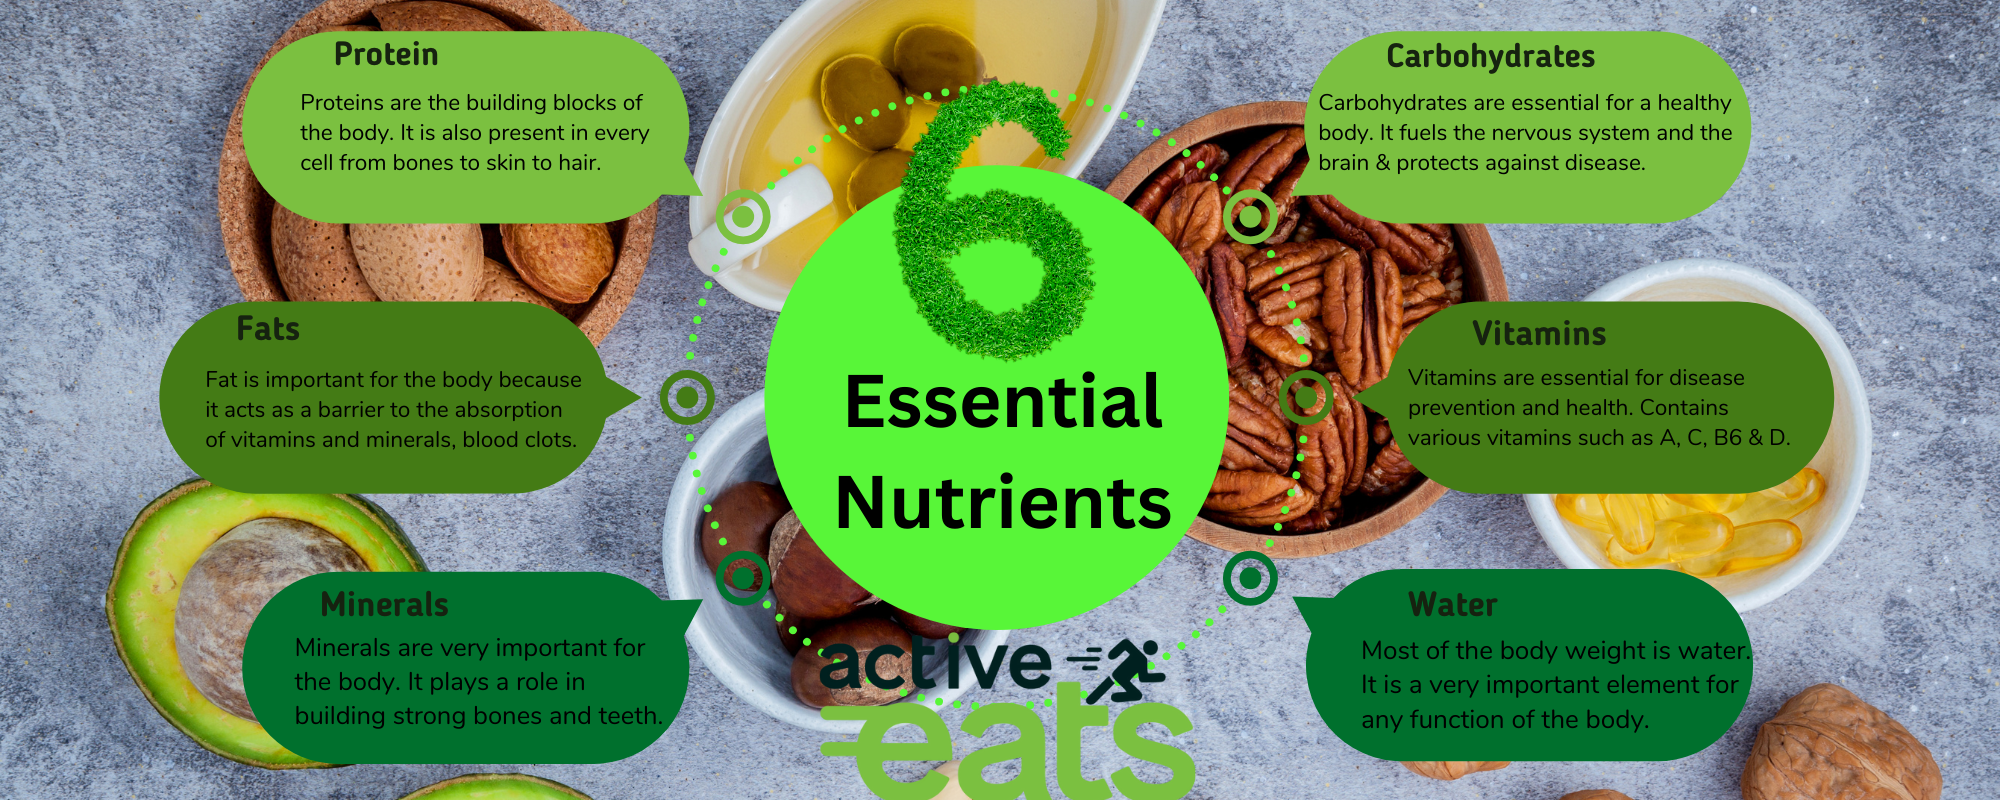 Top 6 Essential Nutrients Our Body needs.